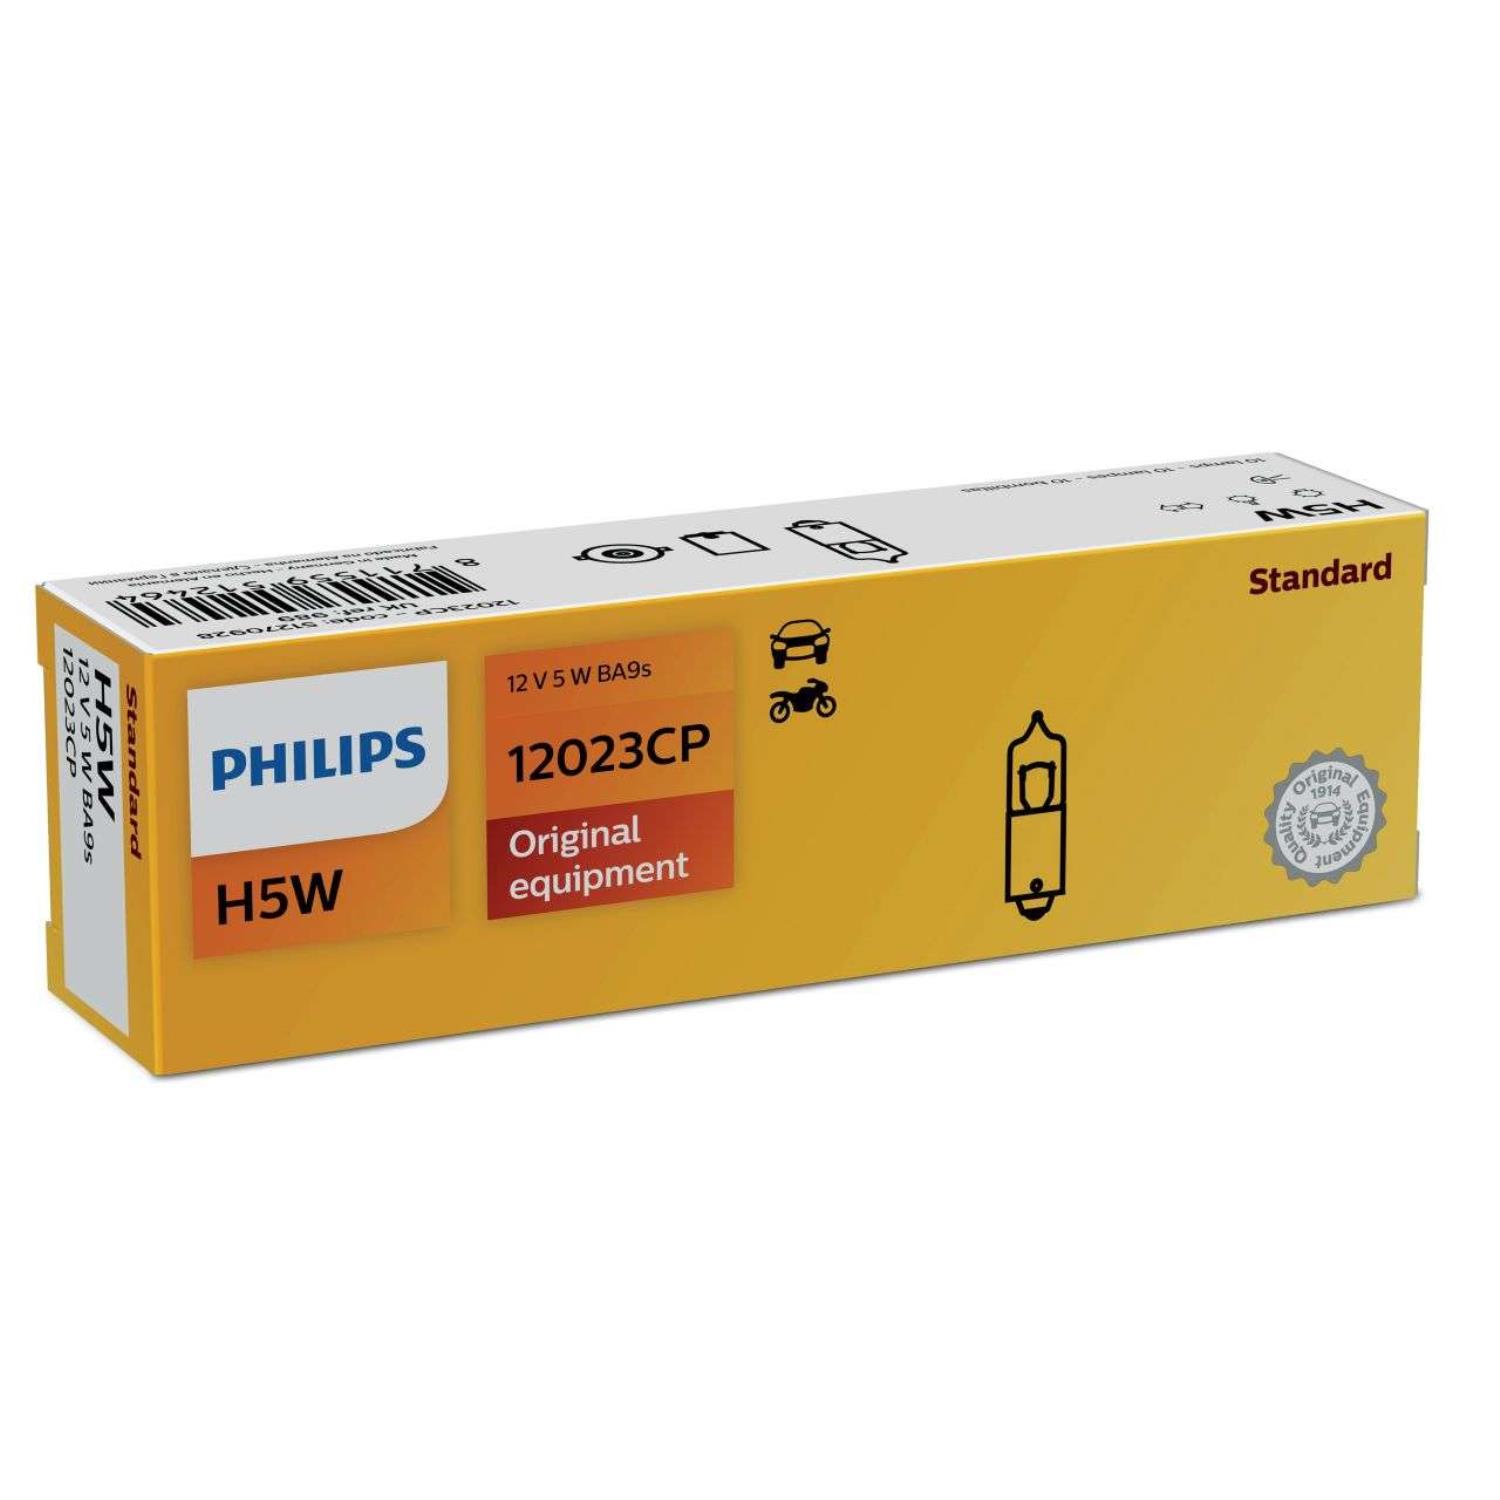 PHILIPS 12023CP Glühlampe Beleuchtung